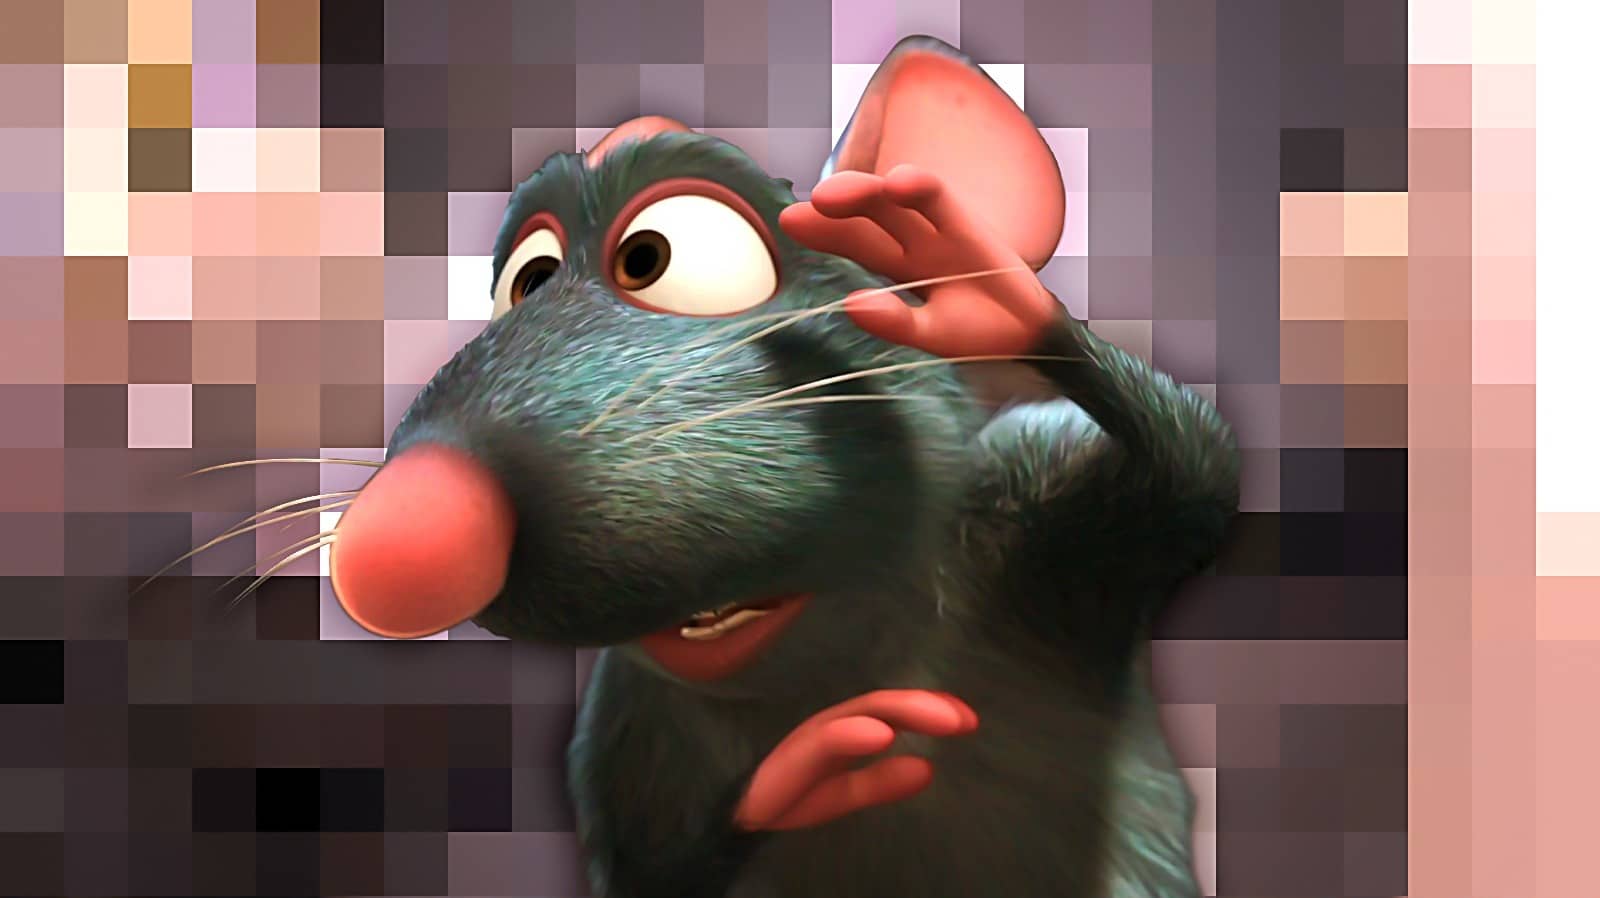 Pixar's Ratatouille Does Have A Scene With Nudity 3